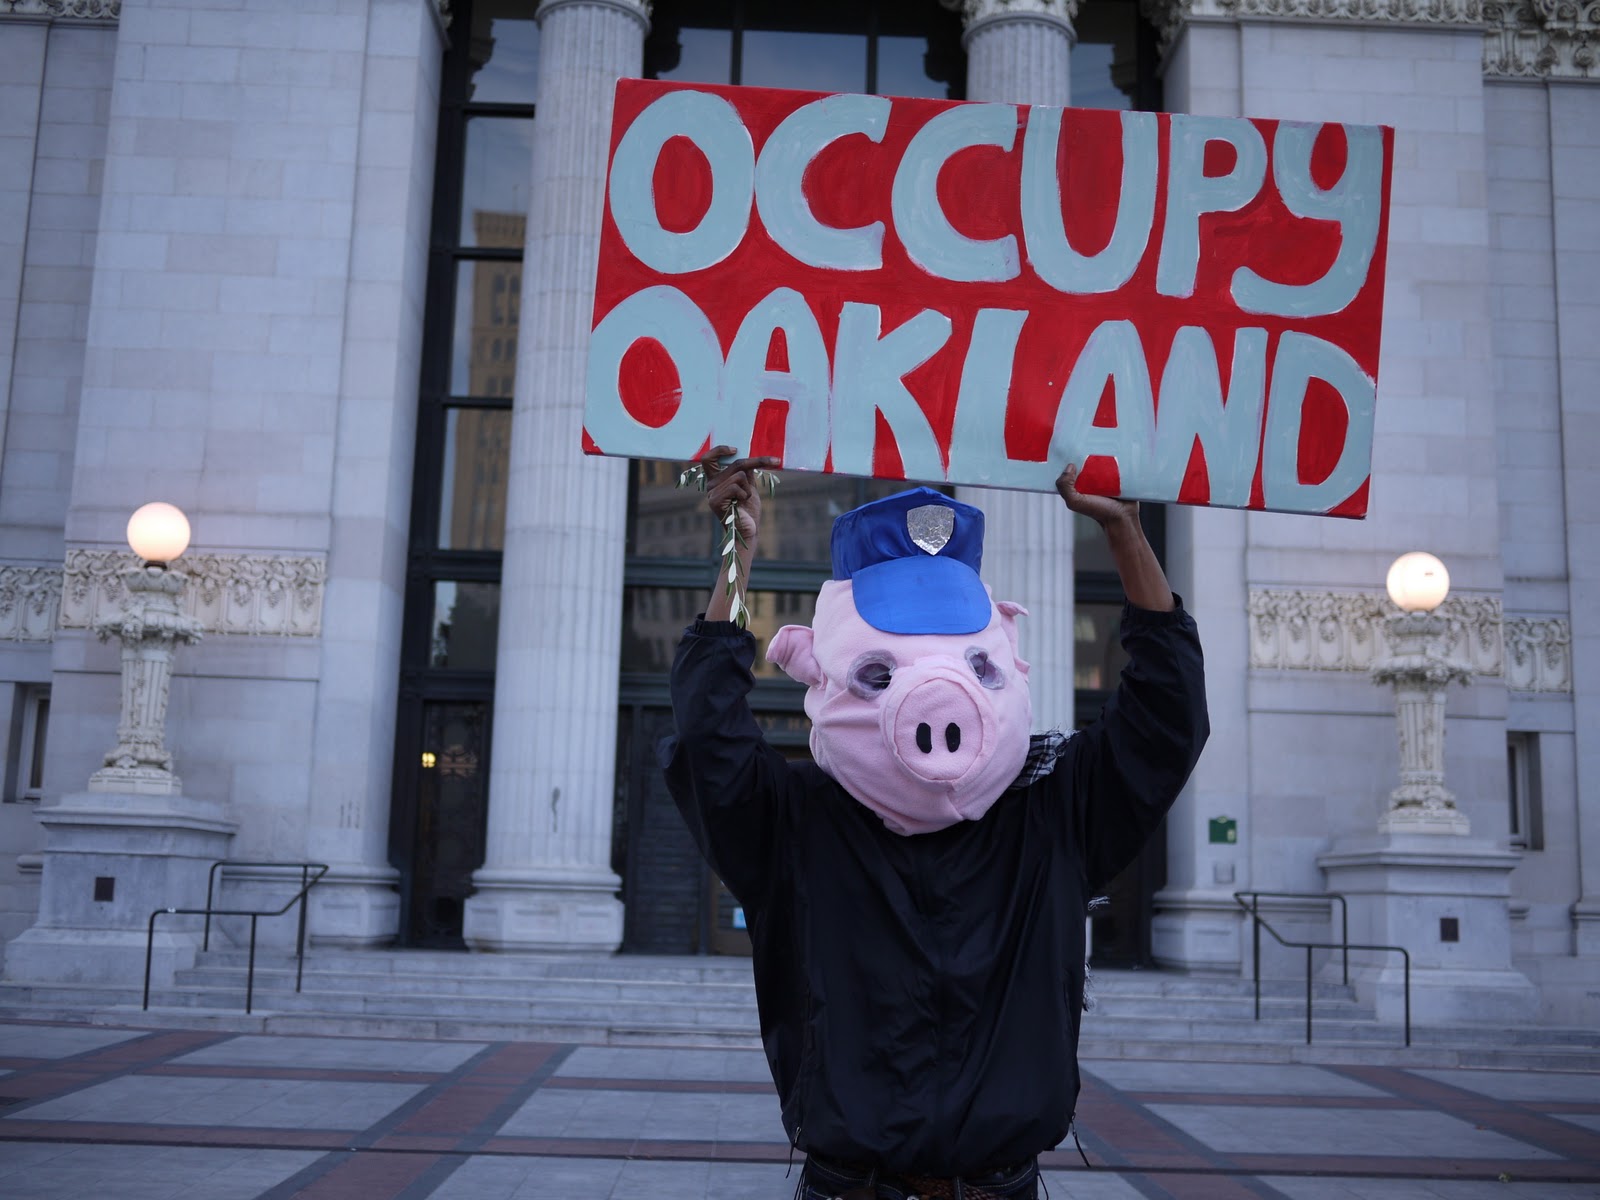 Occupy Oakland Plans Building Takeover #J28